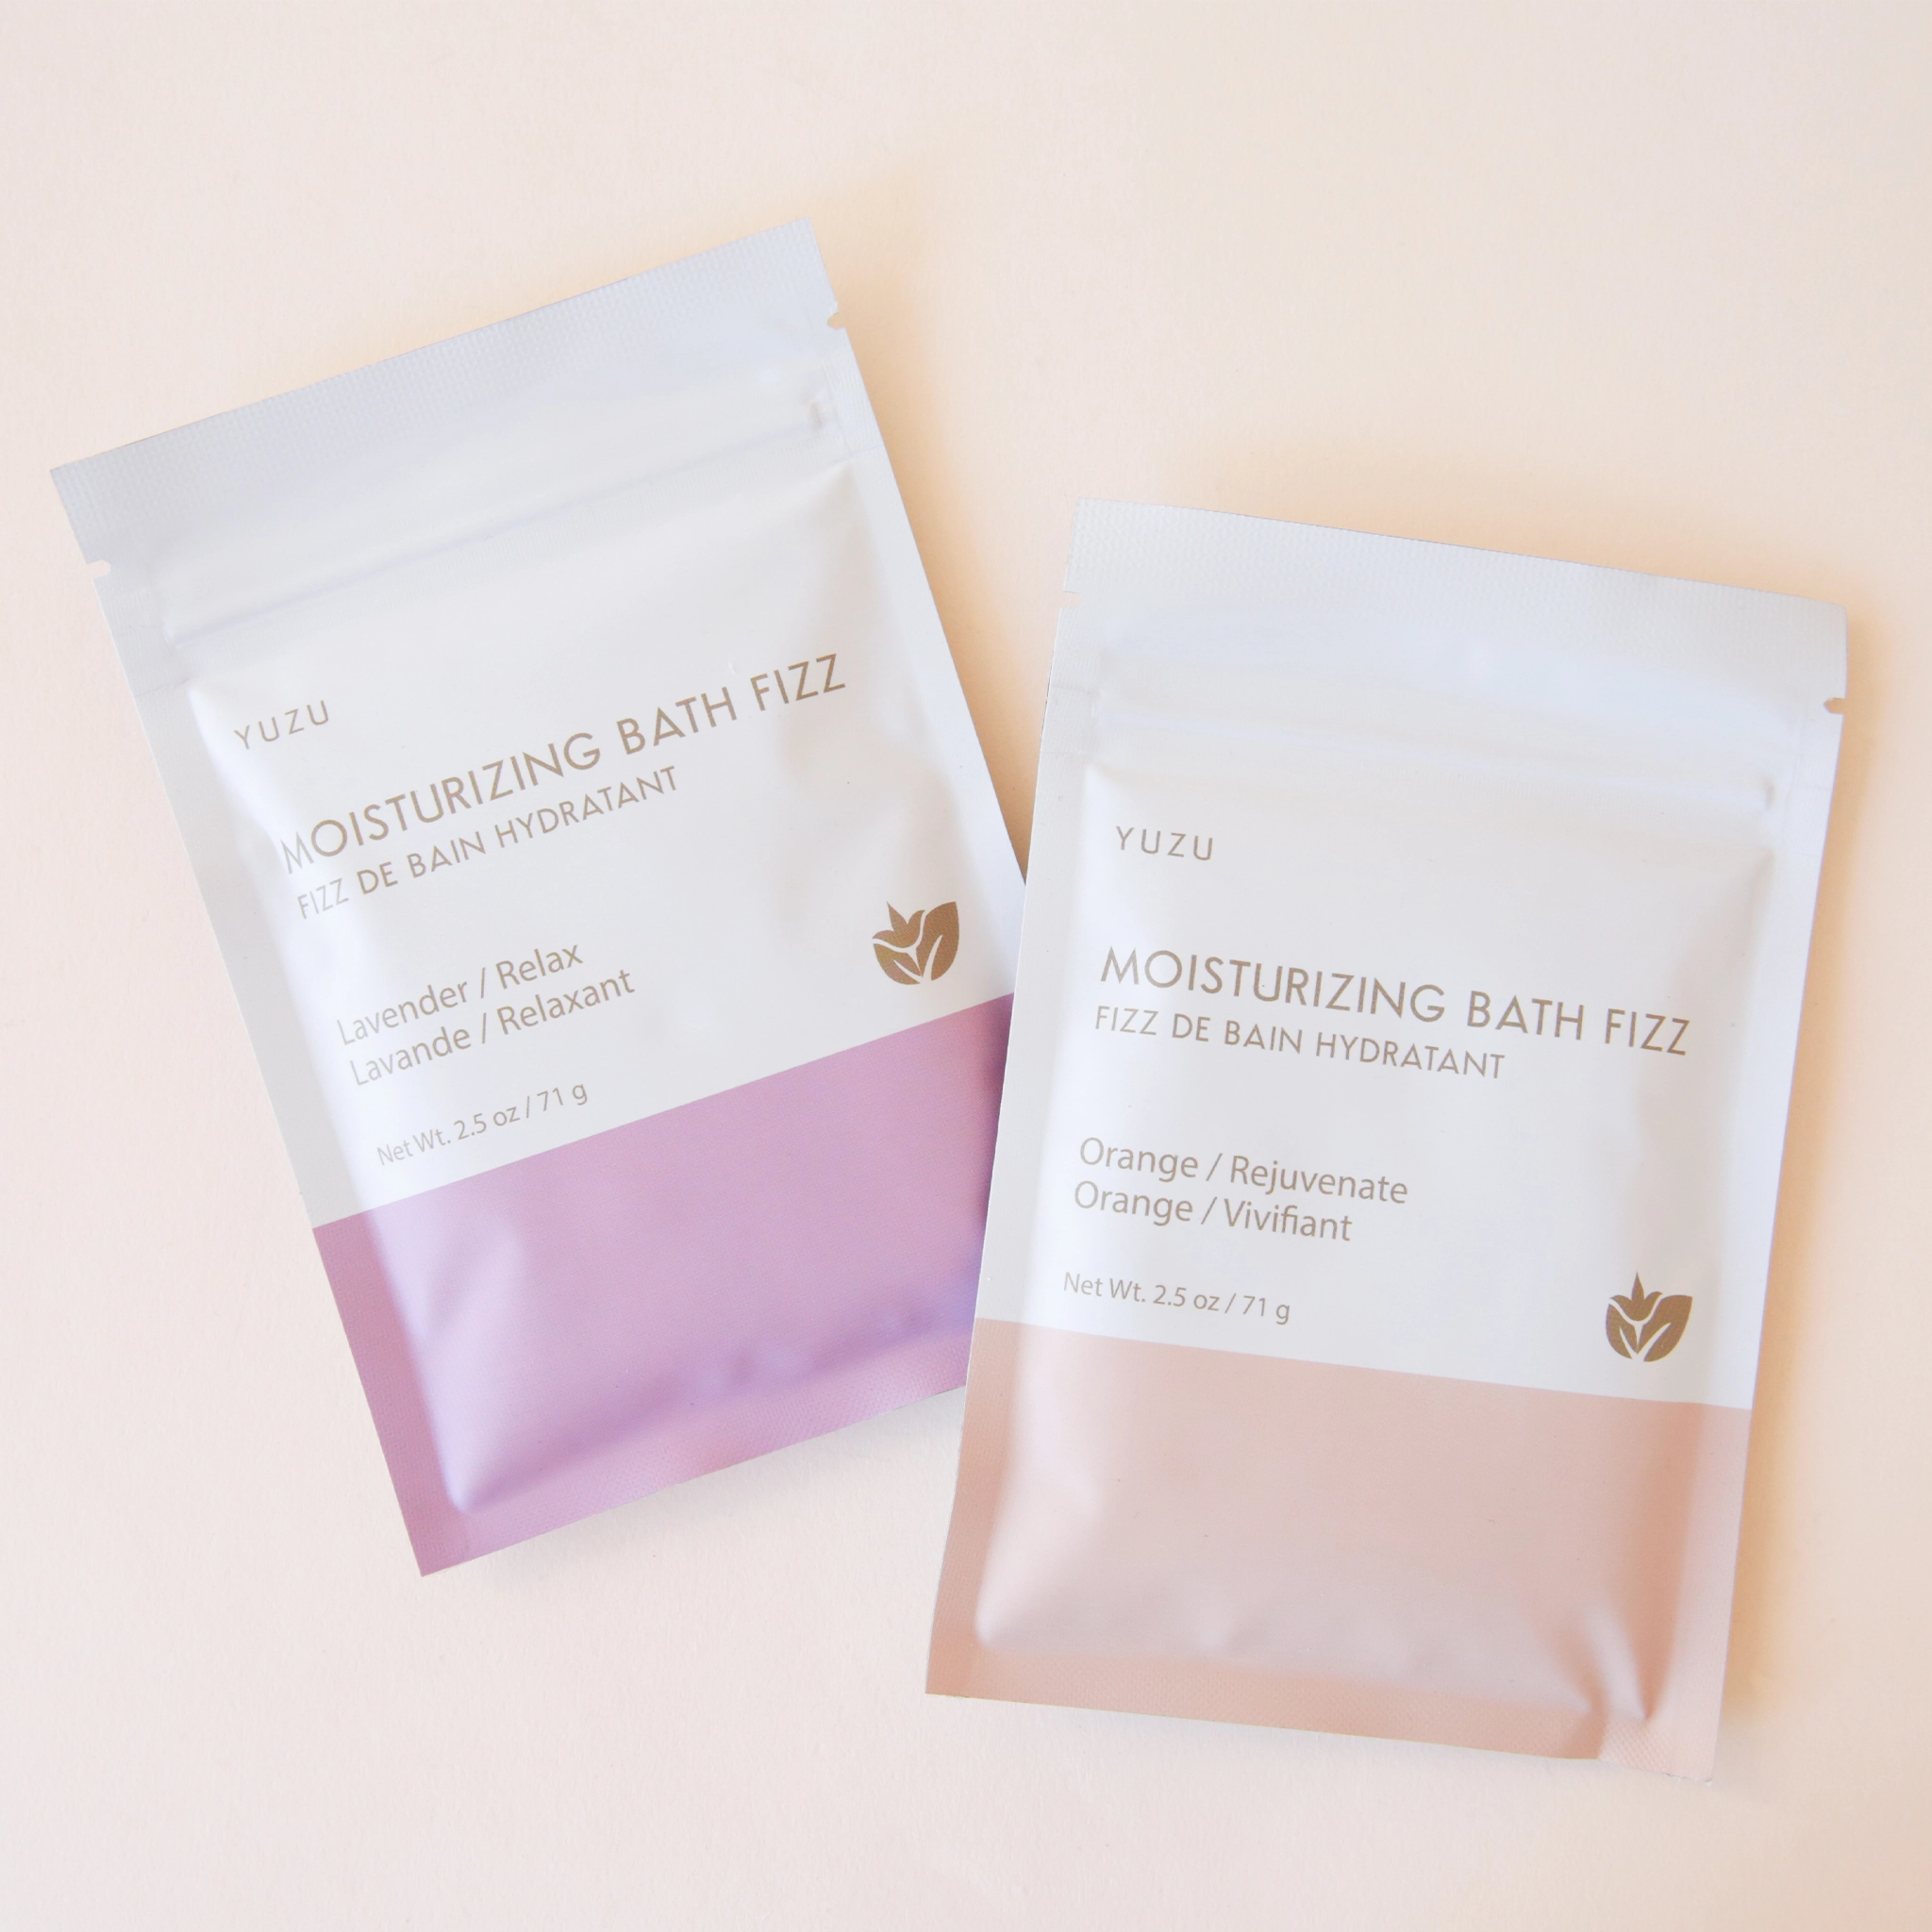 A packet of bath salts with the bottom half a light pink color and the top half white along with text on the front that reads, "Moisturizing Bath Fizz, Orange / Rejuvenate" photographed with the Lavender scent that's also available on our website.